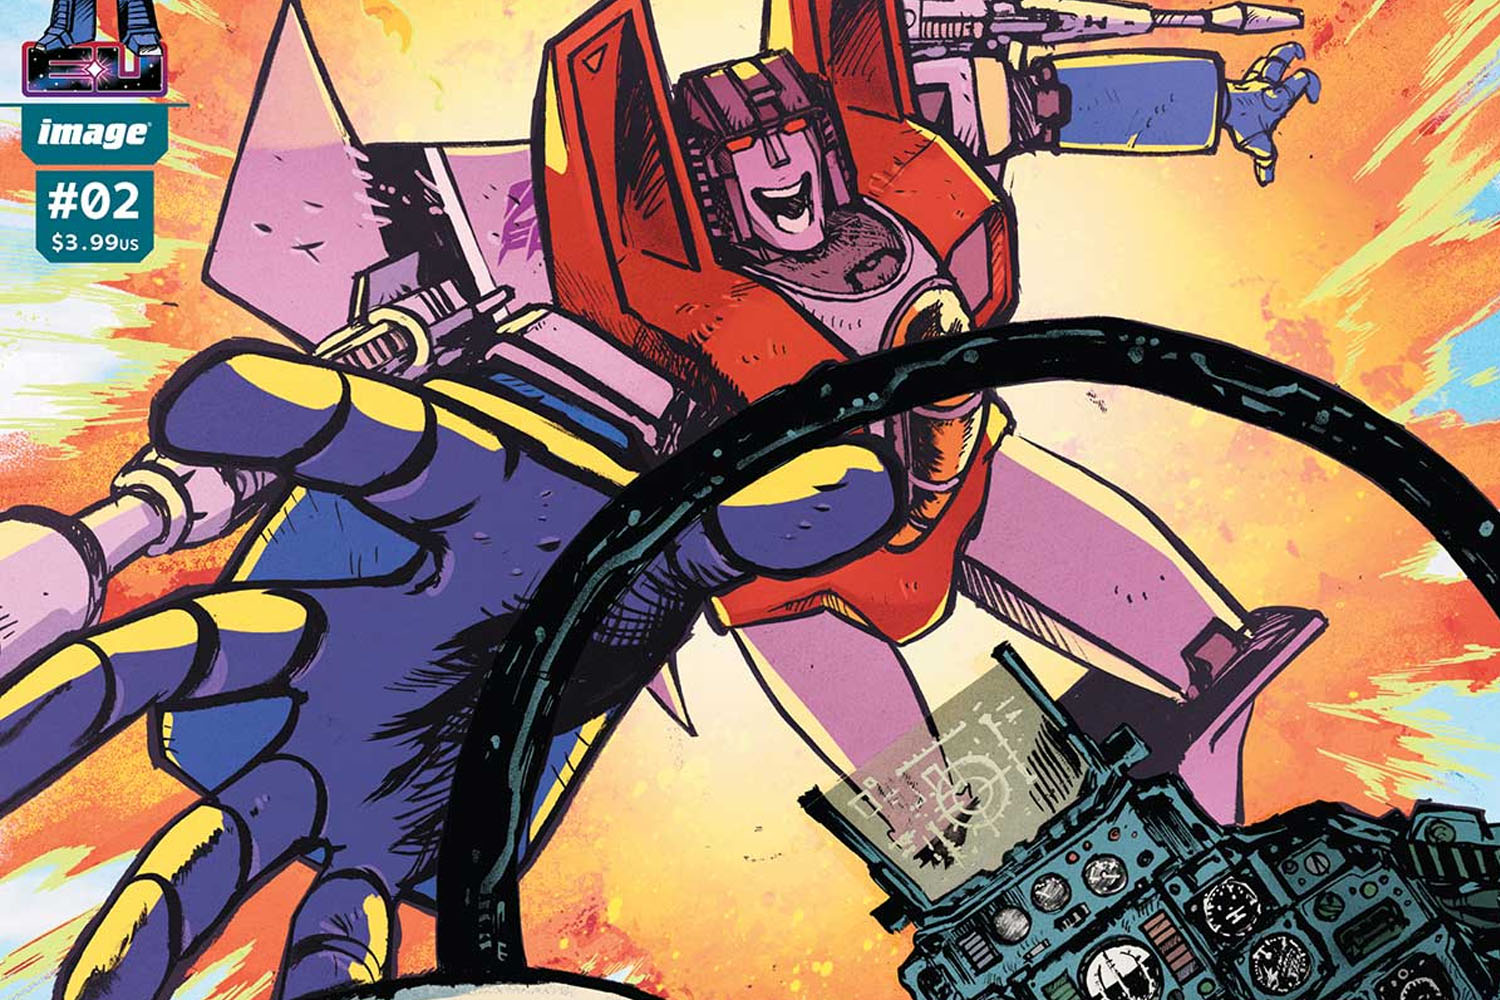 Transformers #2 reminds us why Optimus Prime is a real hero